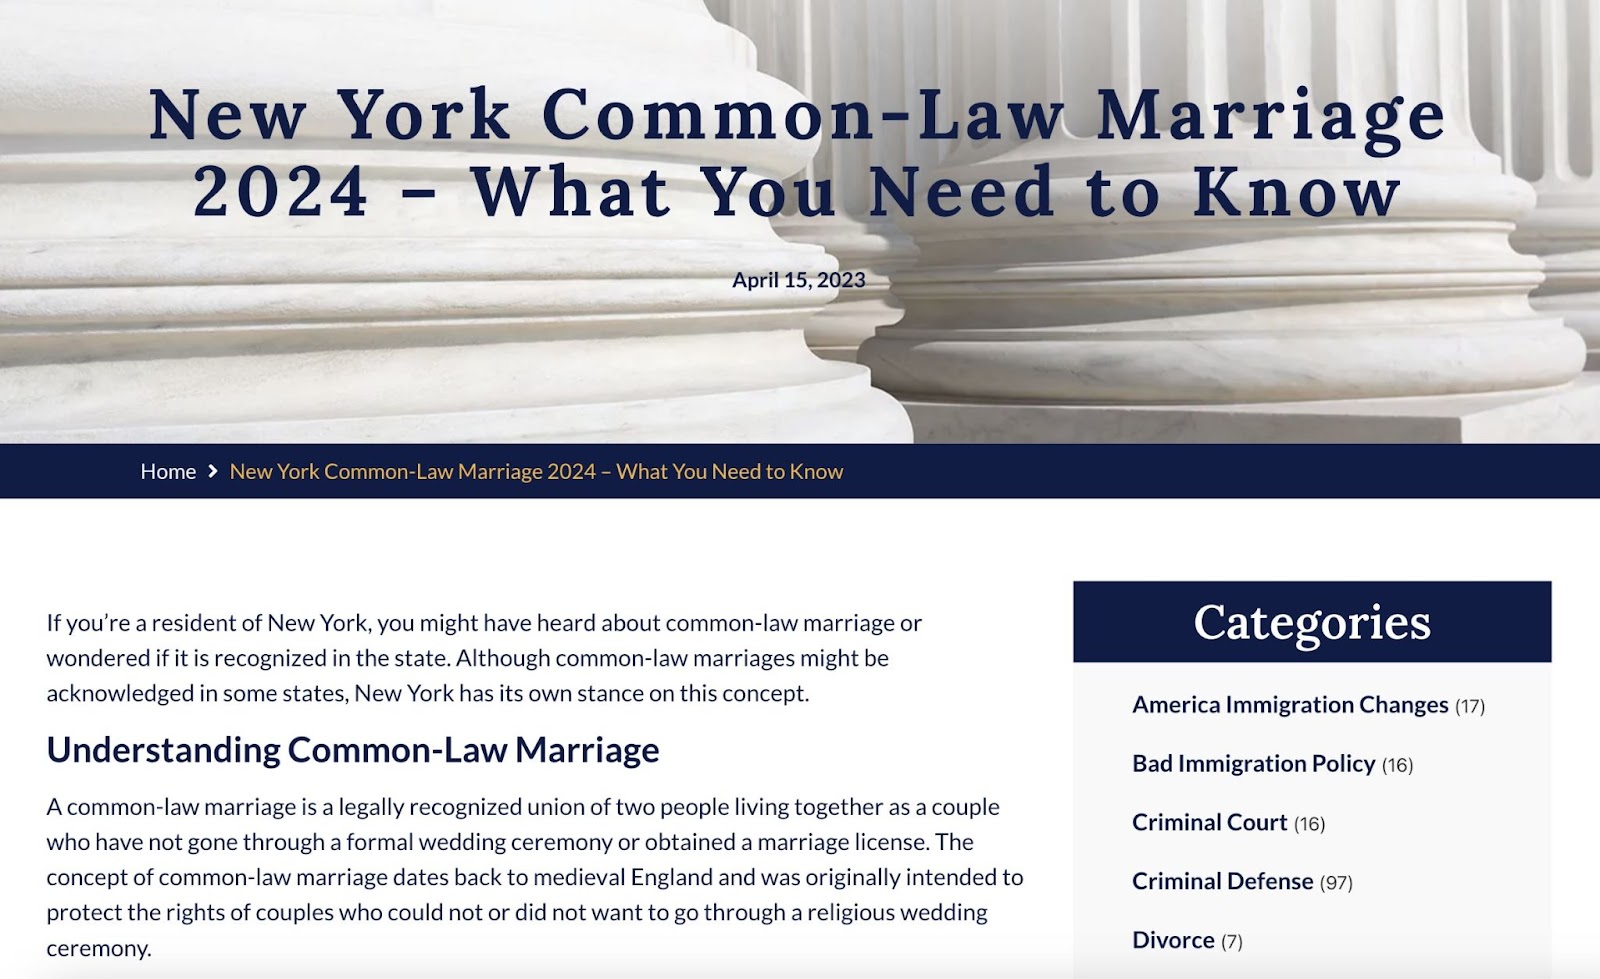 Blog post about common law marriage in New York